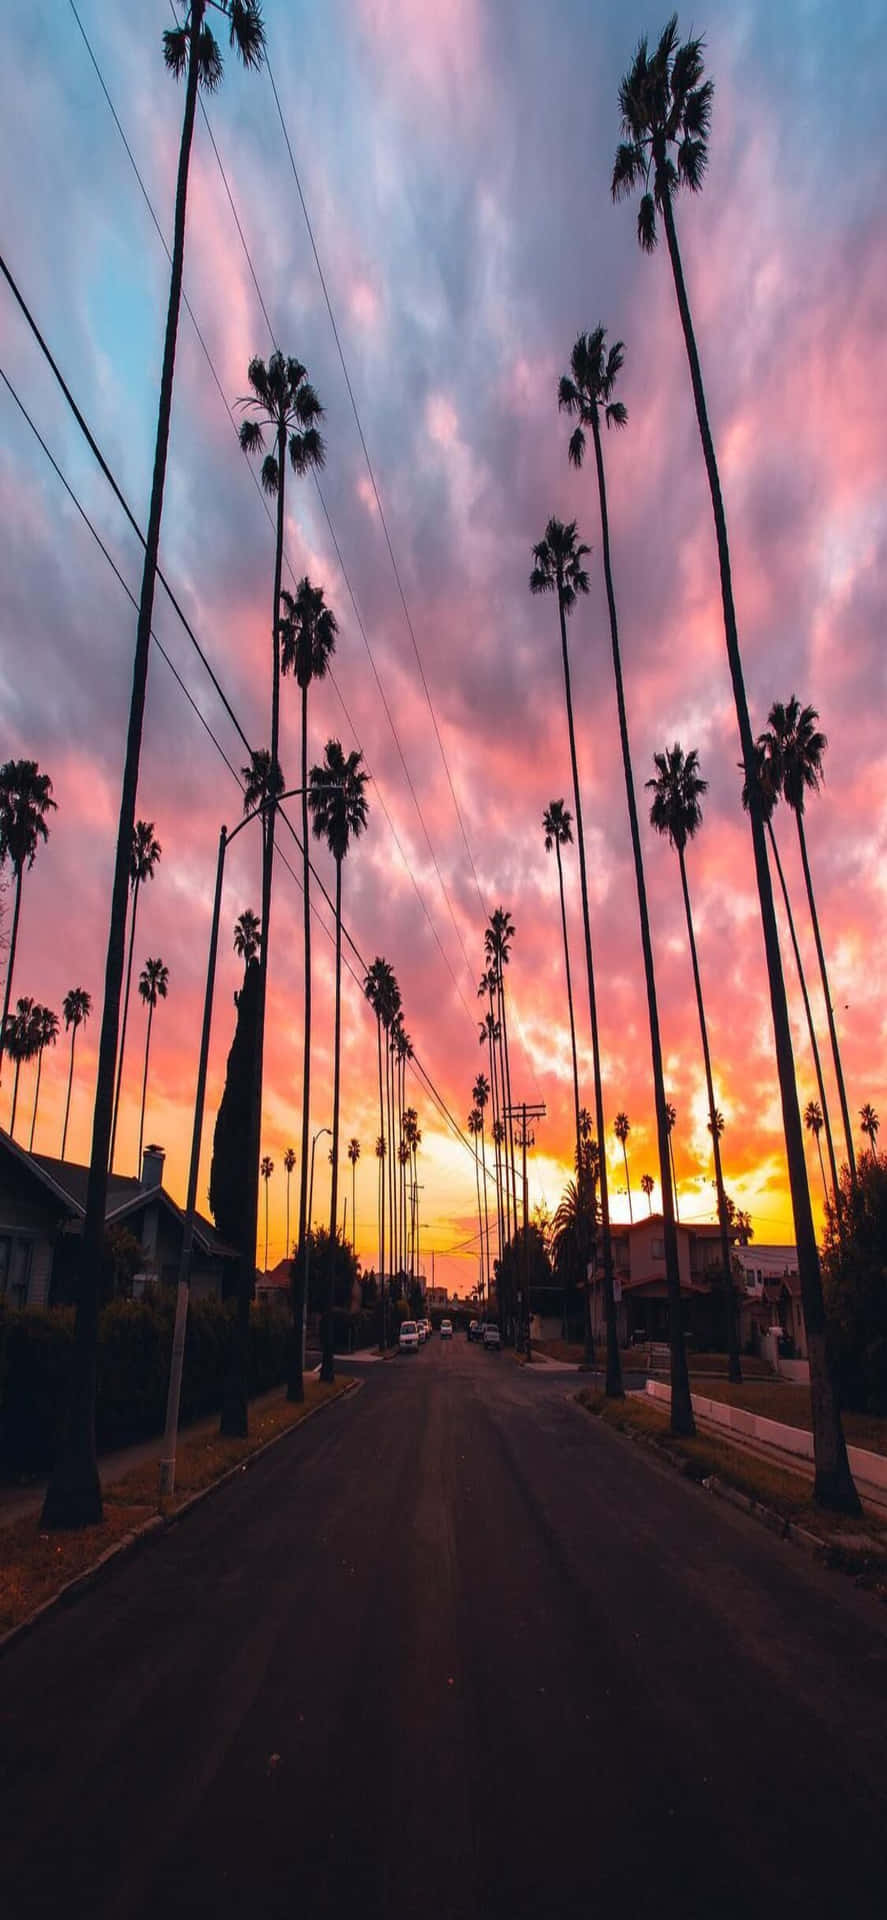 A Street With Palm Trees And A Colorful Sunset